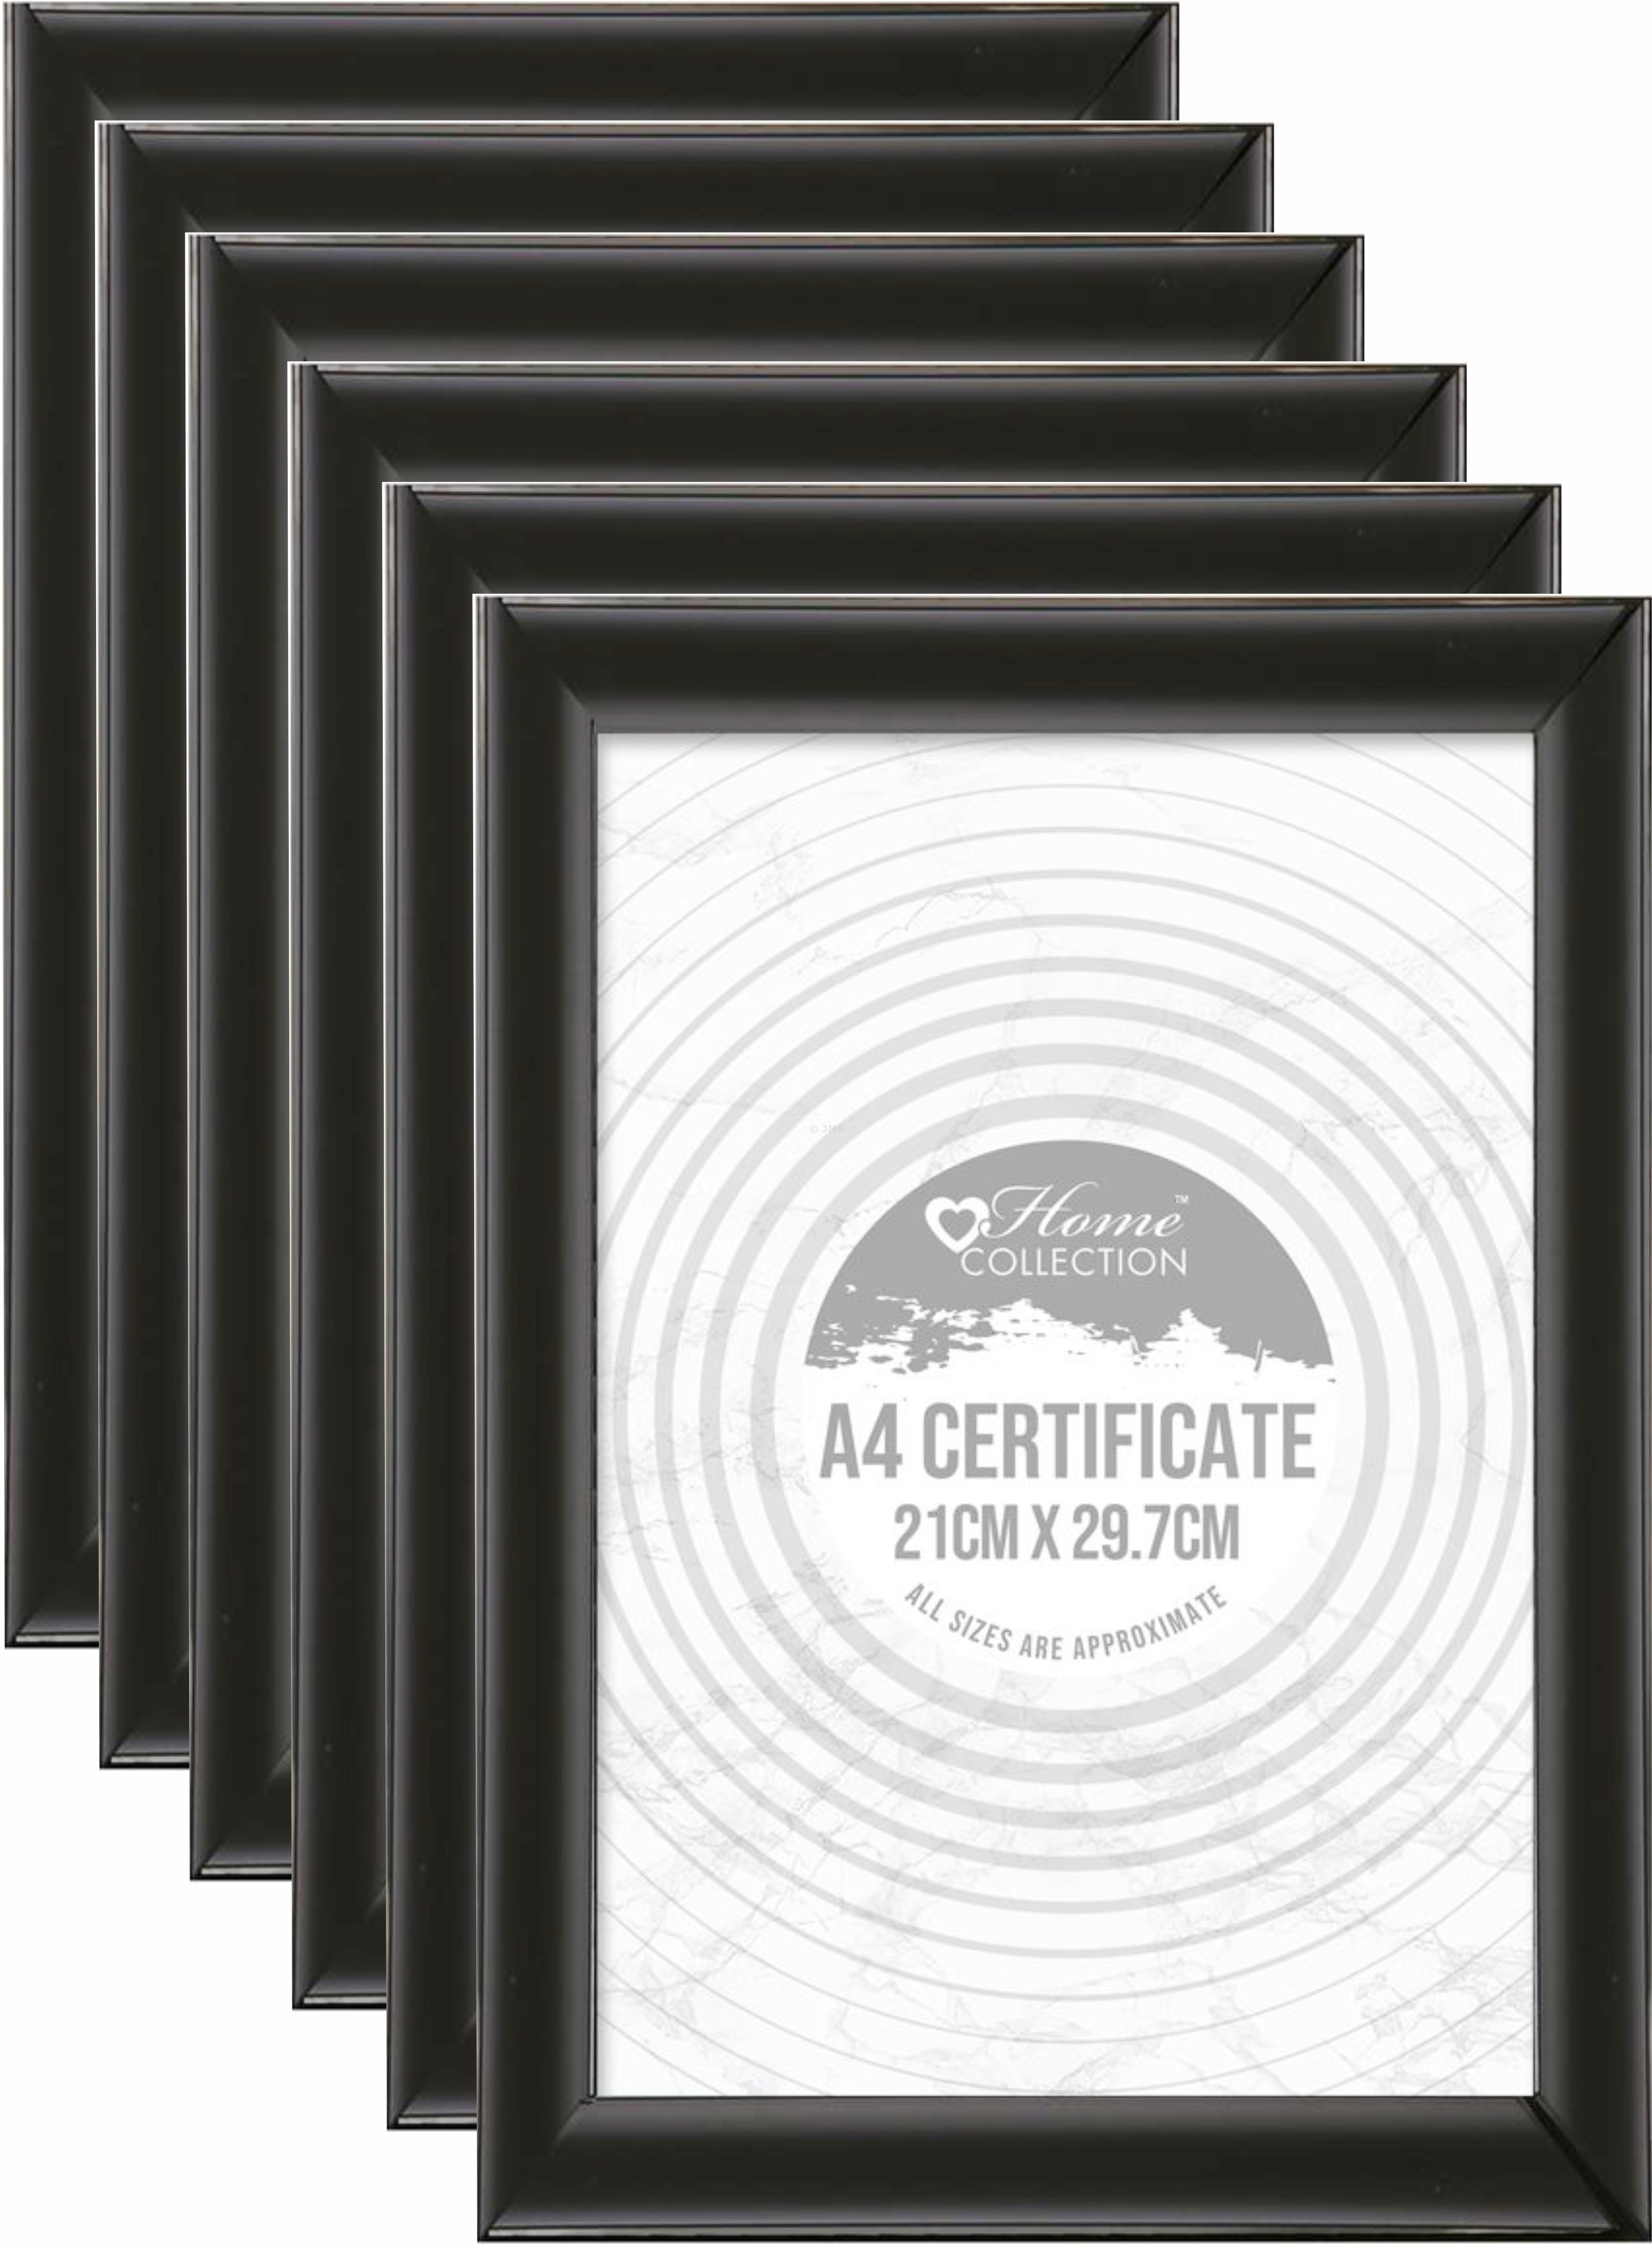 6 x Black Styrene Photo Picture Frame A4 (21 x 29.7cm) Certificate Frames Wall Mountable Poster Art